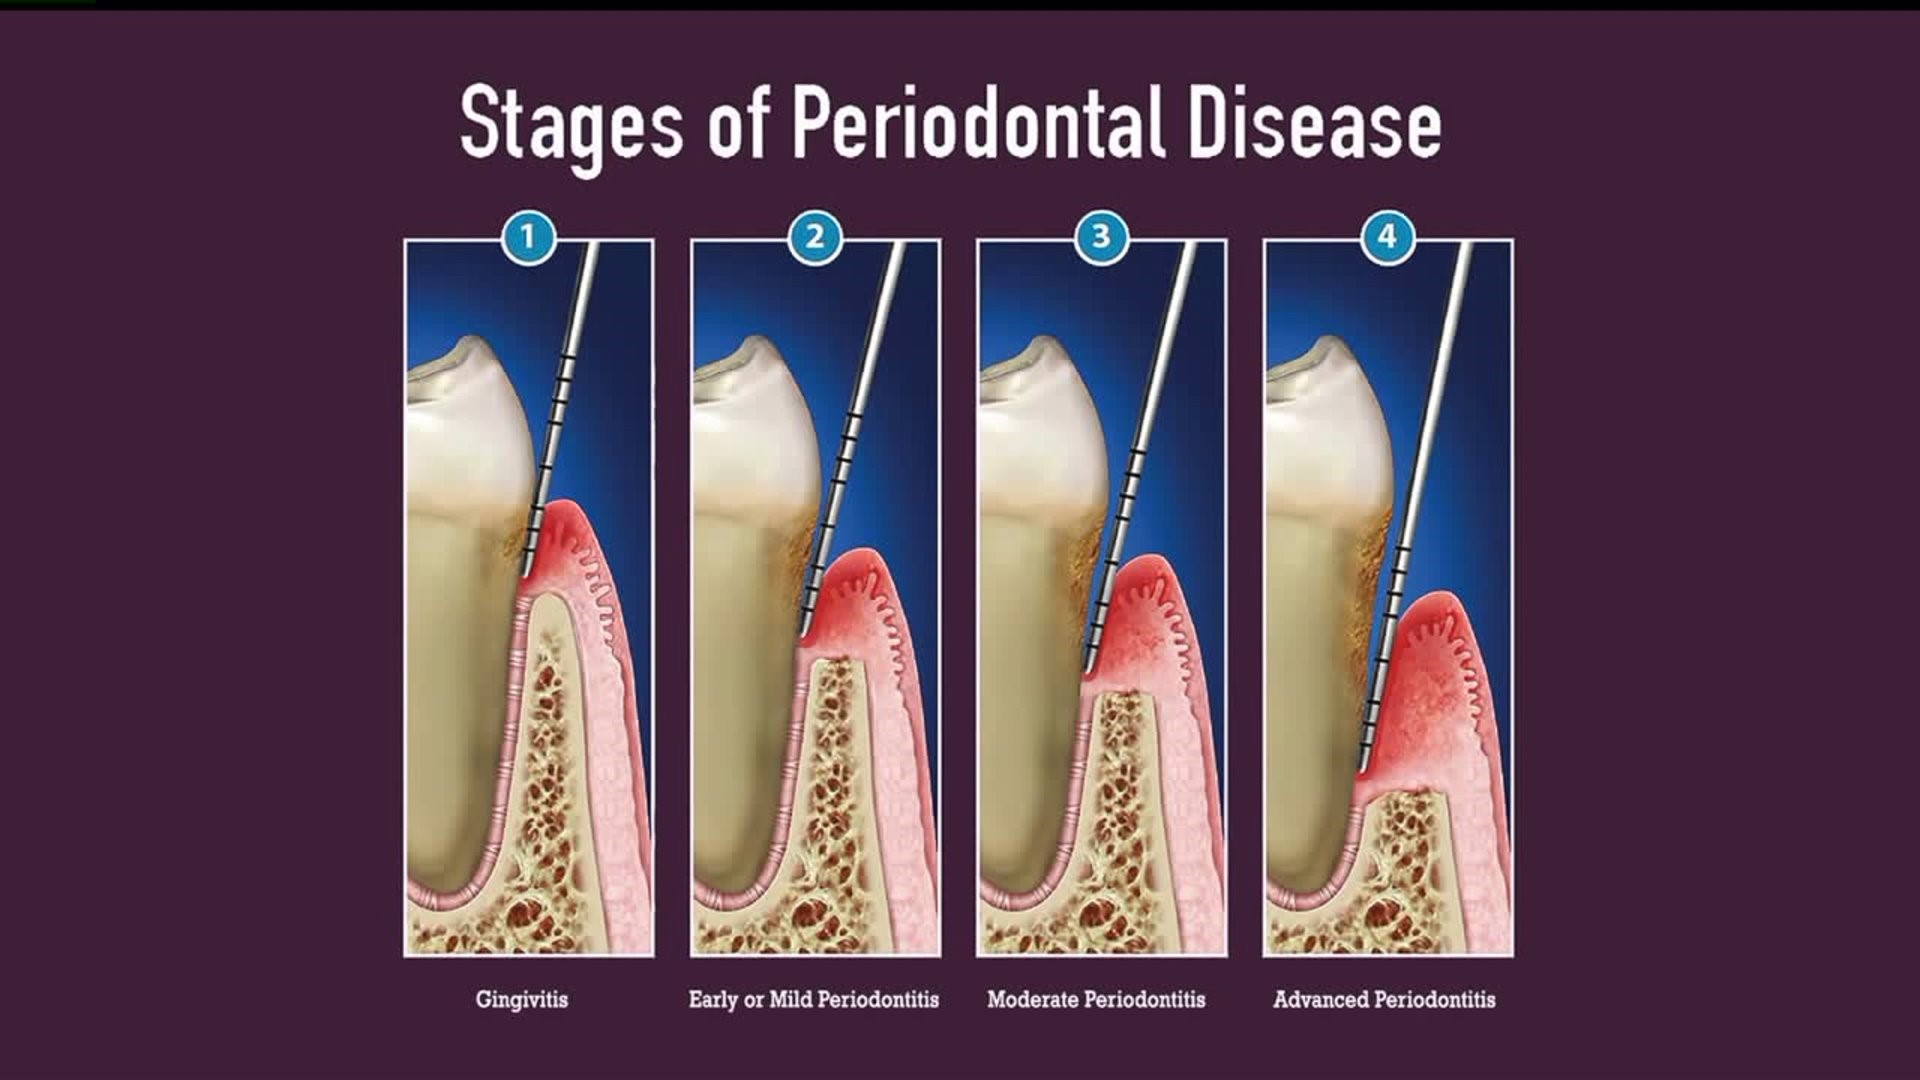 Periodontal disease affects over 64 million Americans